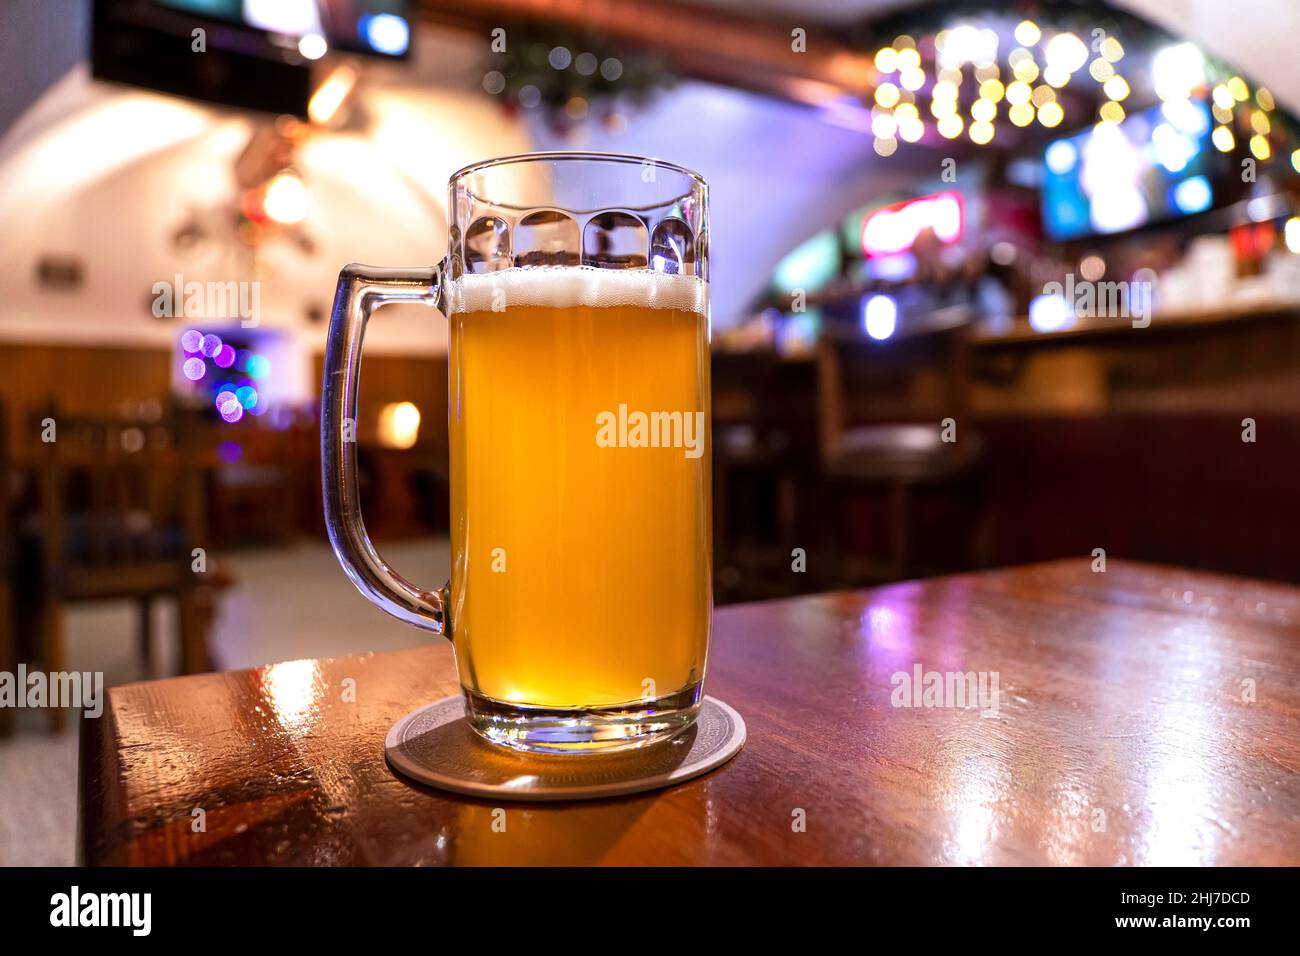 Resting. Full glass of light lager beer wooden table in warm light of bar. Alcohol, entertainment, traditional drinks, Oktoberfest atmosphere concept. Stock Photo